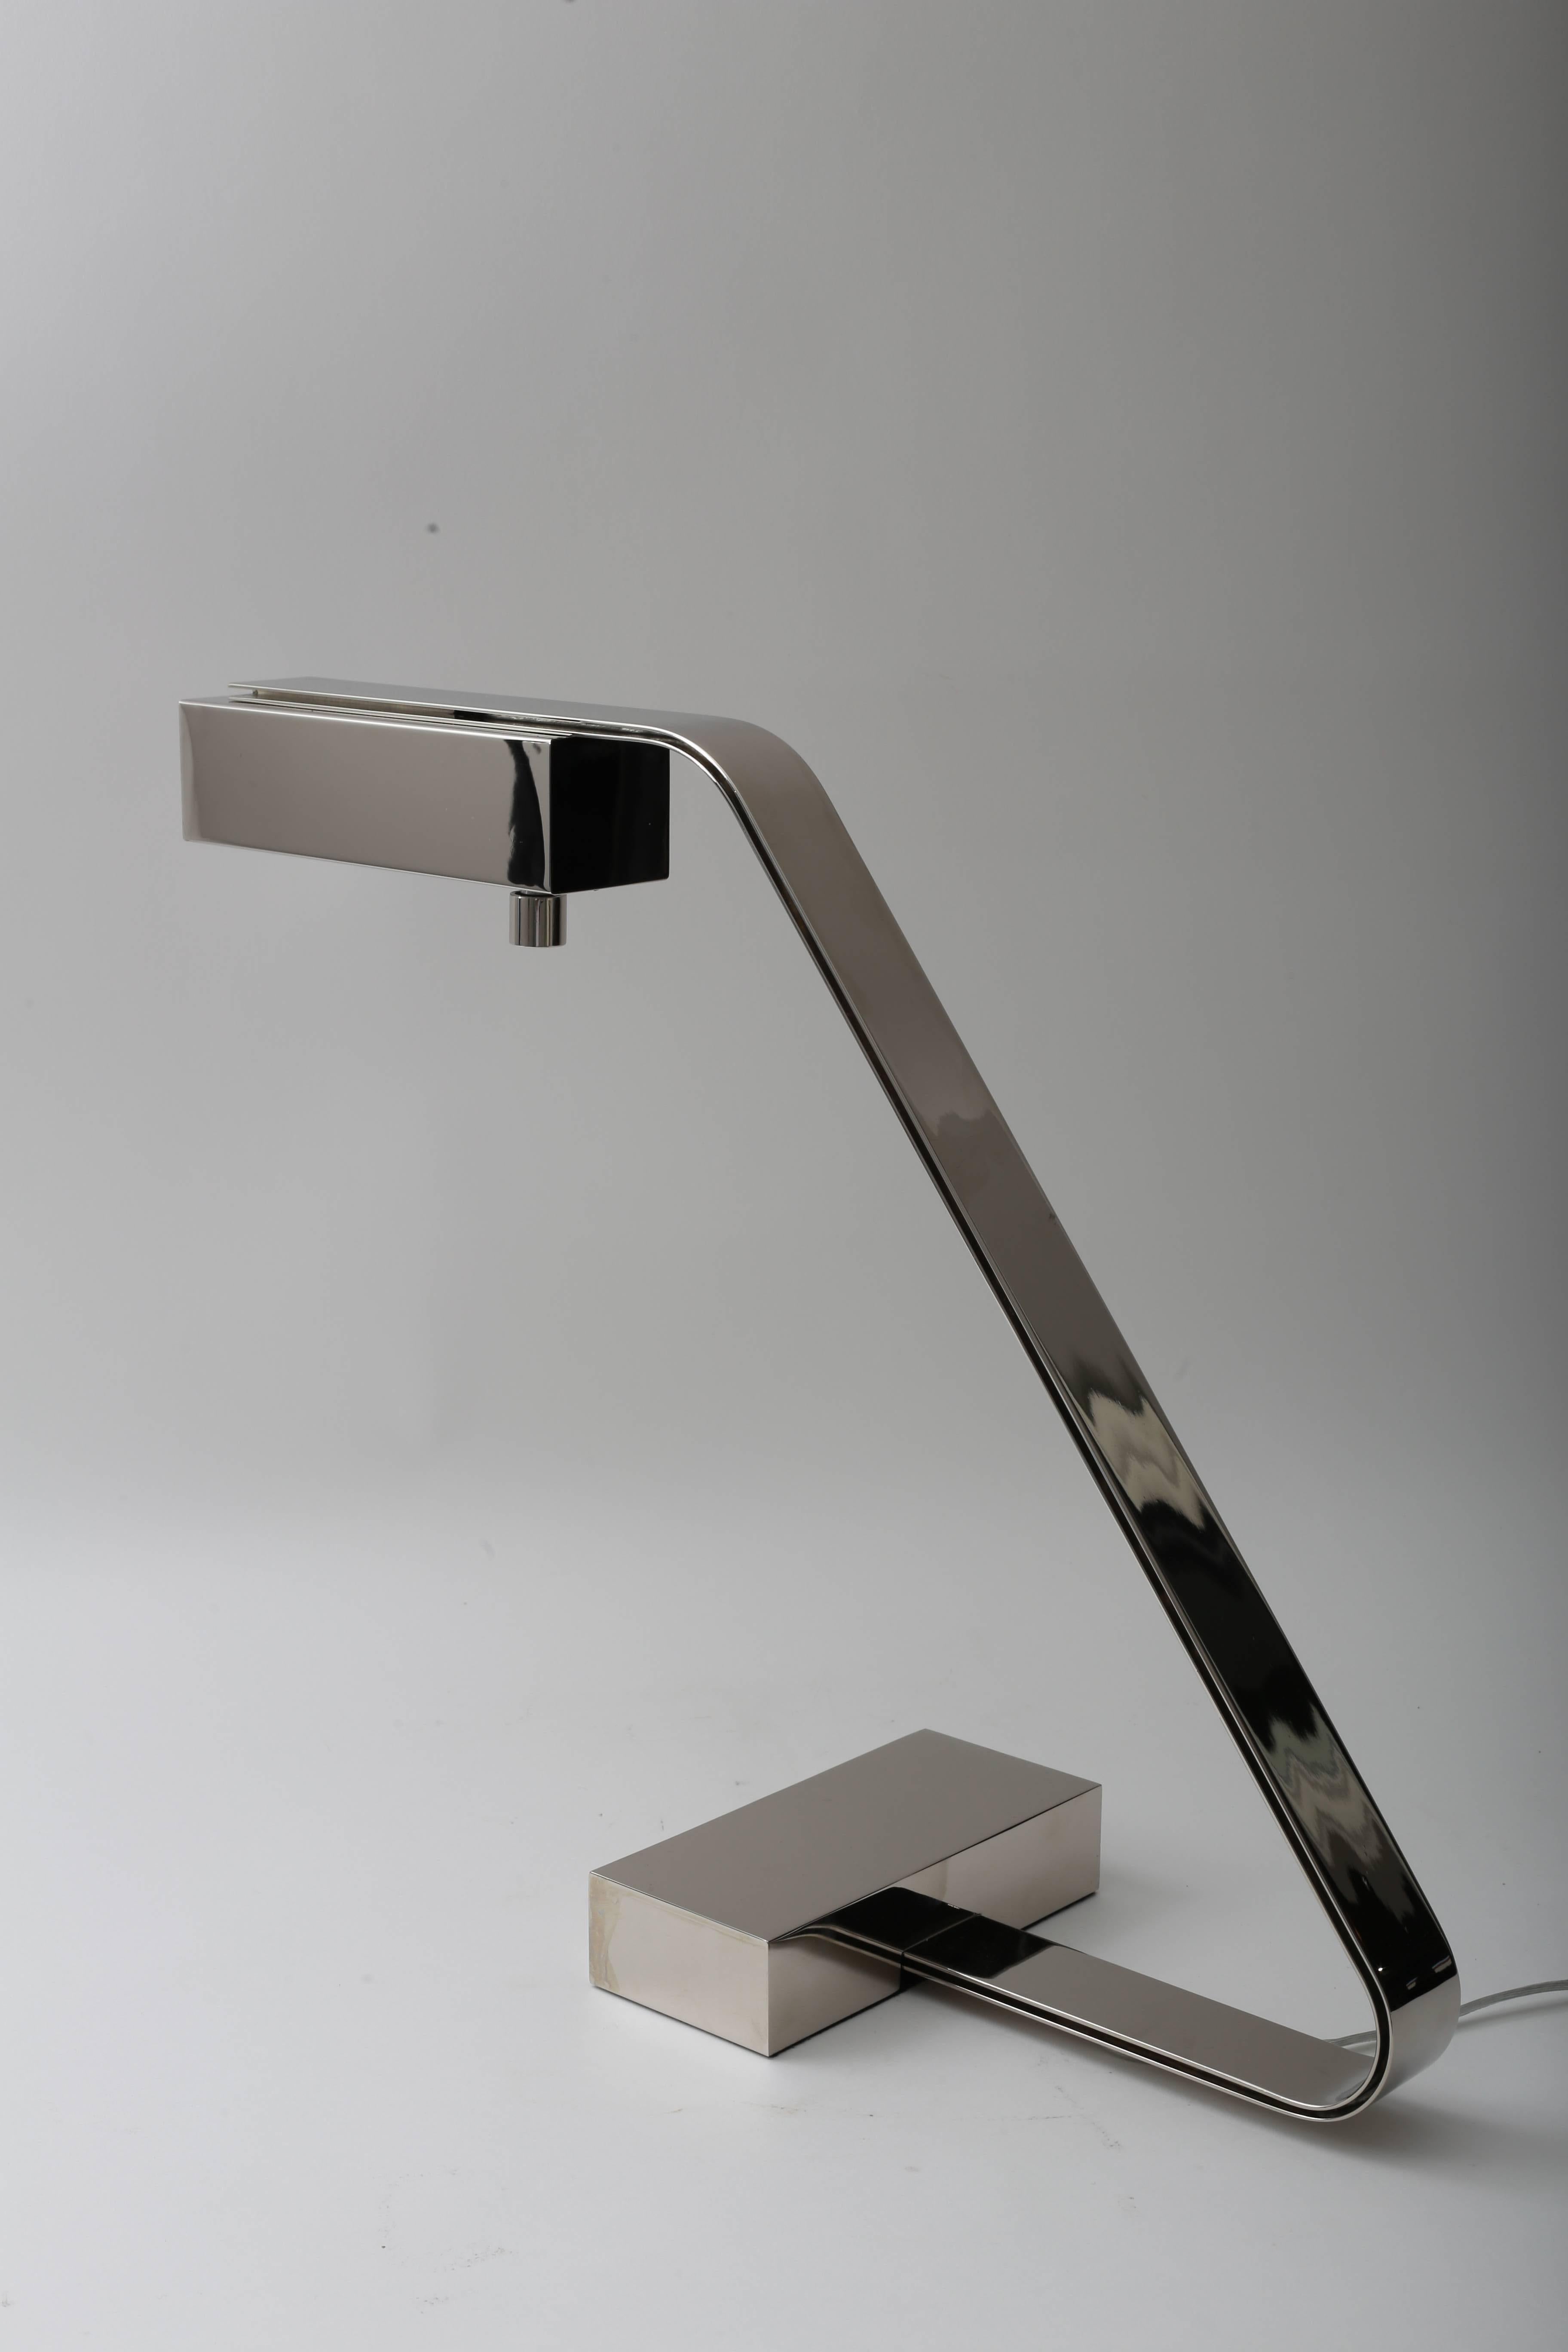 20th Century 1970s, Casella Table Lamp in Nickel-Plated Bronze